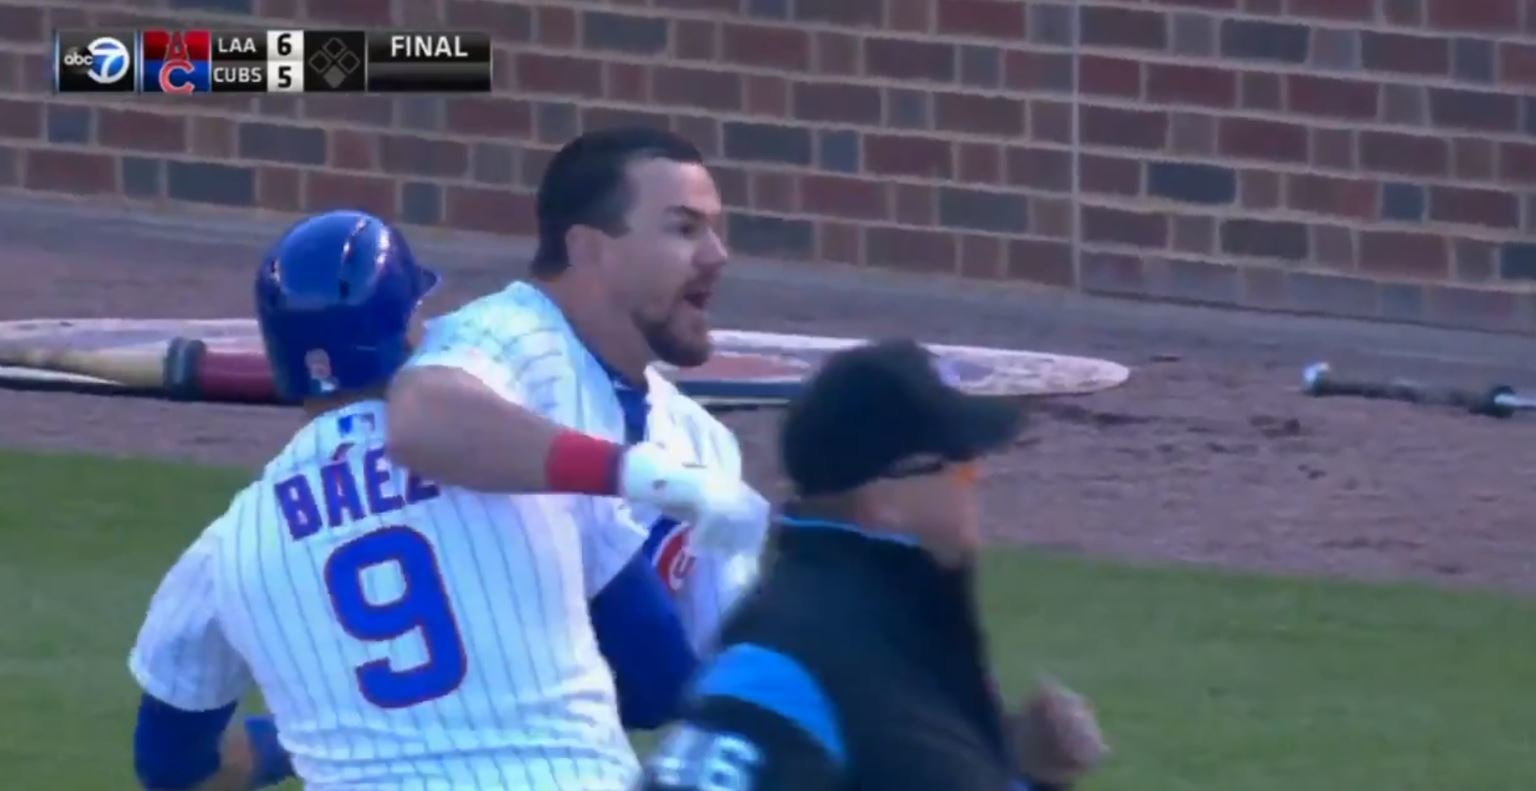 Cubs News: Schwarber on game-ending strikeout call: 